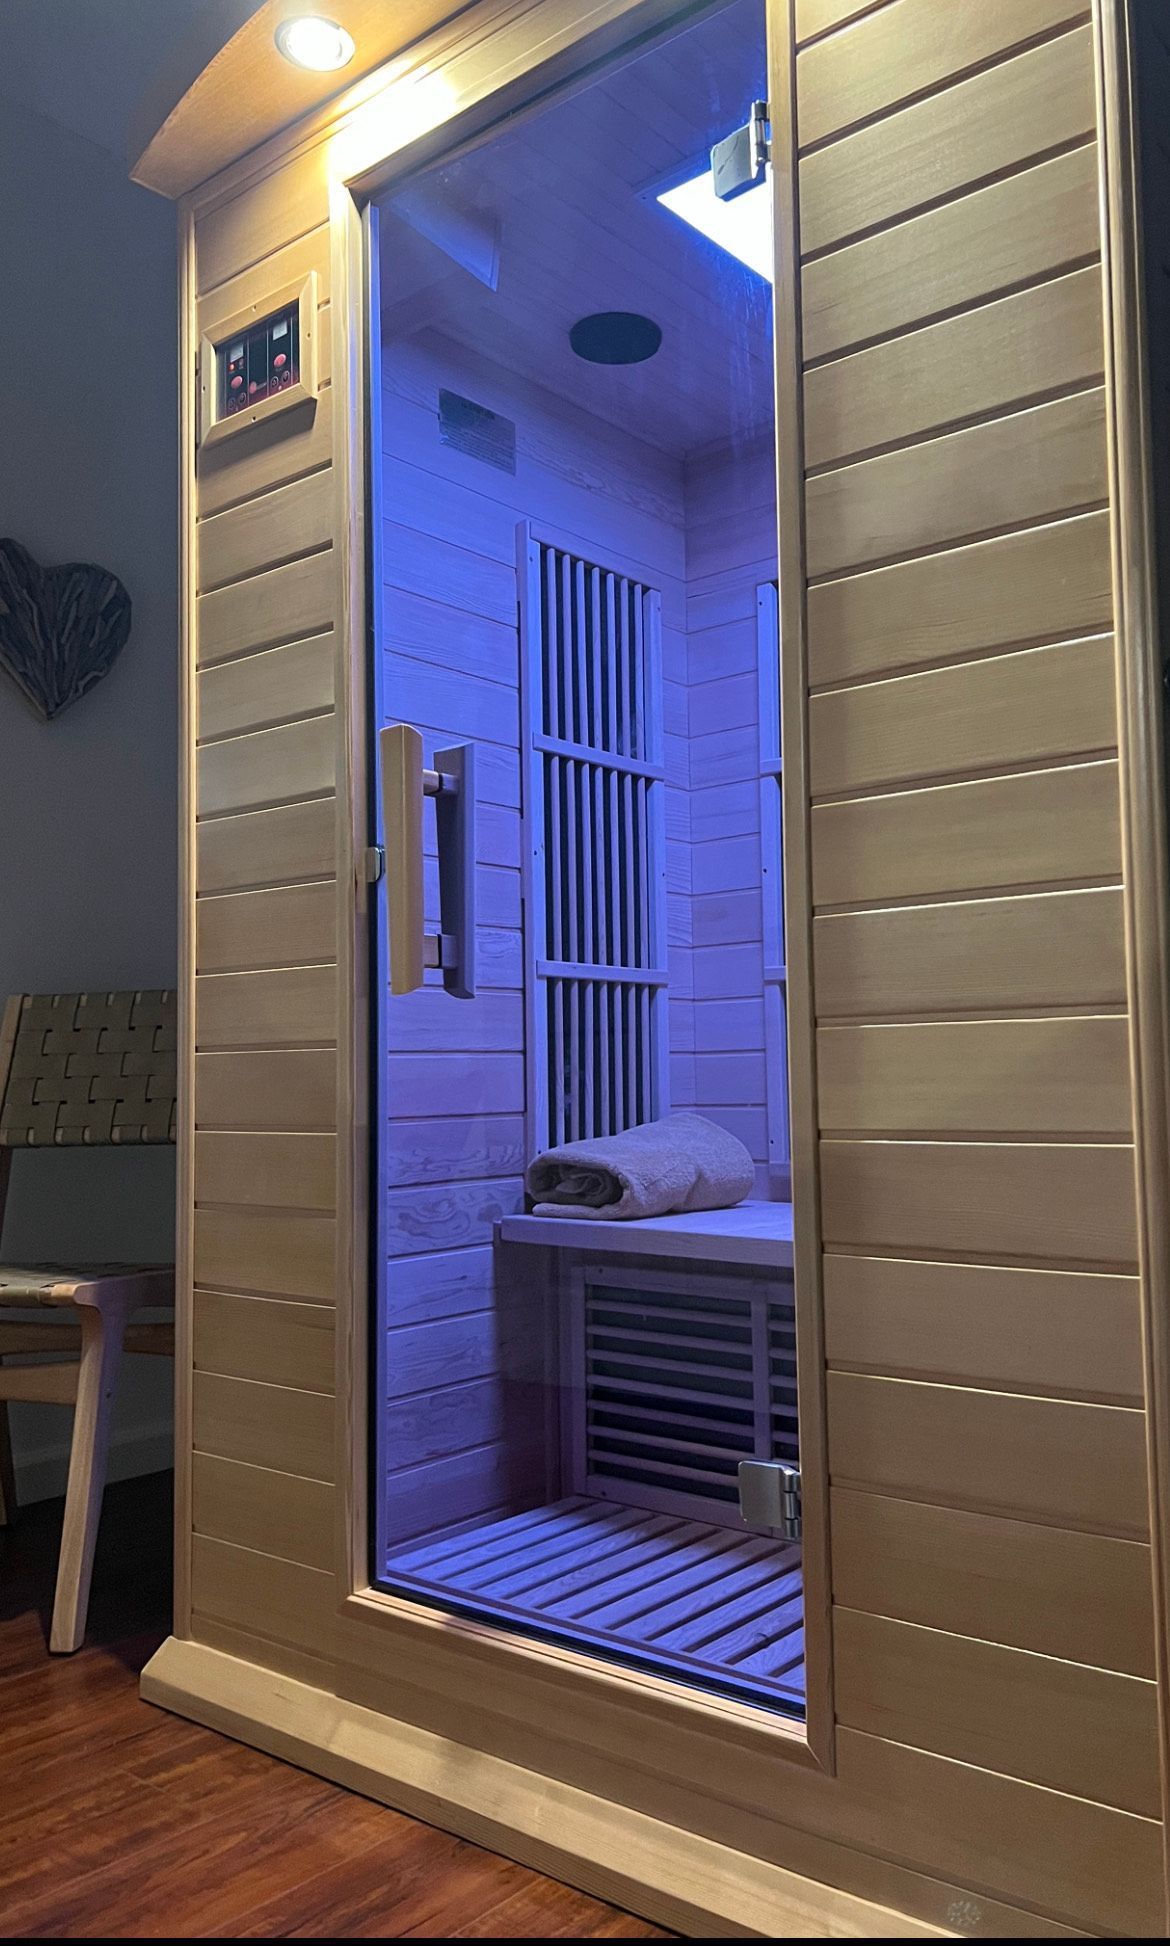 A wooden infrared sauna is sitting in a room next to a chair.